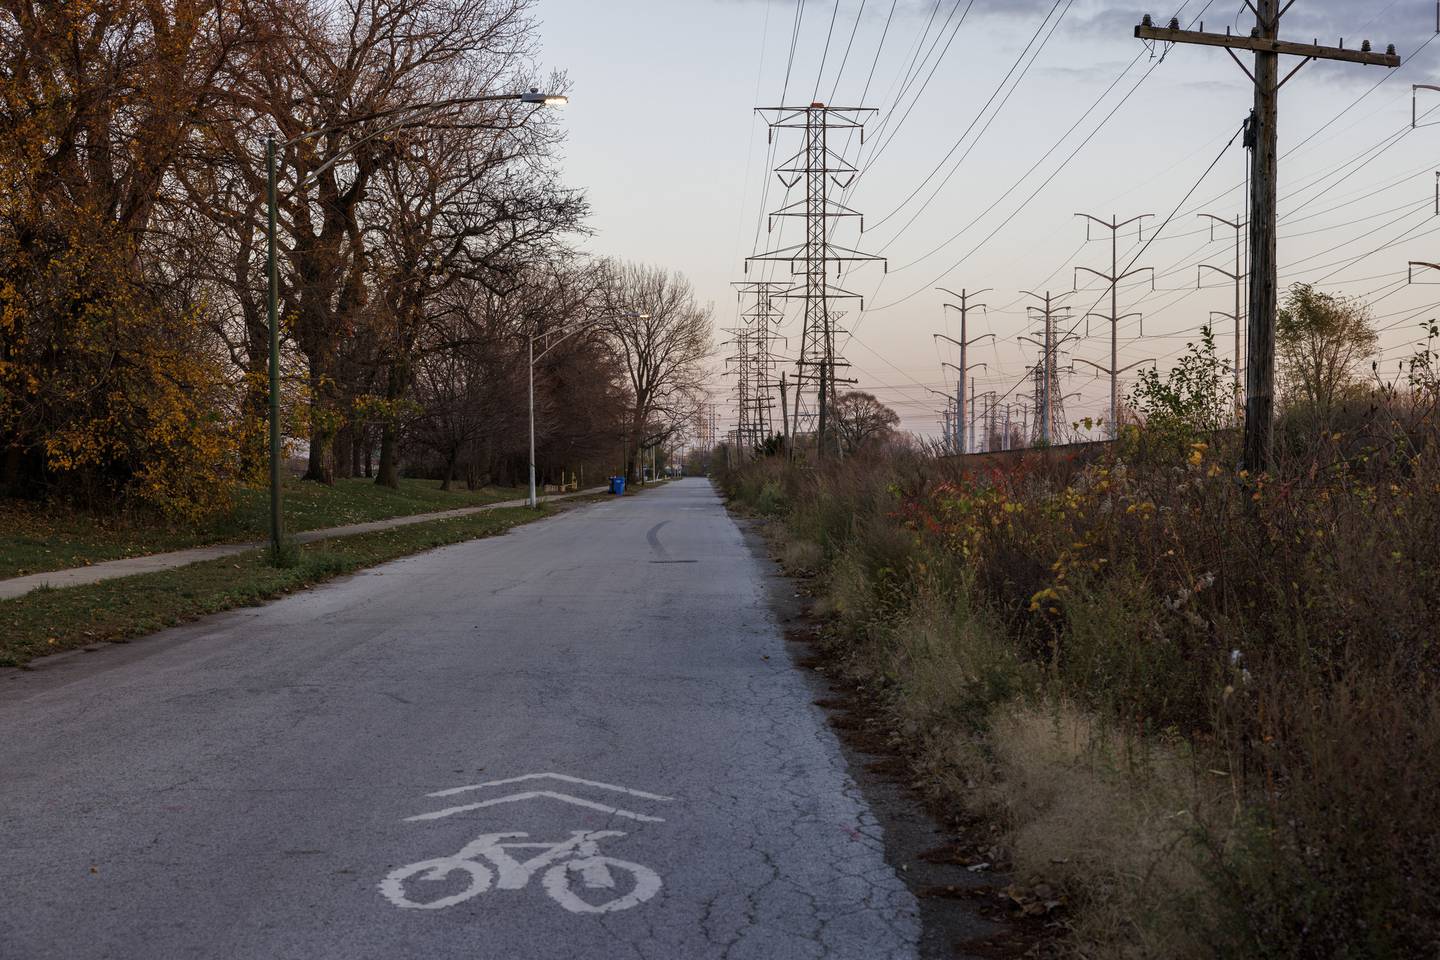 Road markers direct cyclists to the Marquette Greenway near the intersection of East 102nd Street and South Avenue G on Nov. 9, 2022 in Calumet Park on Chicago's East Side.